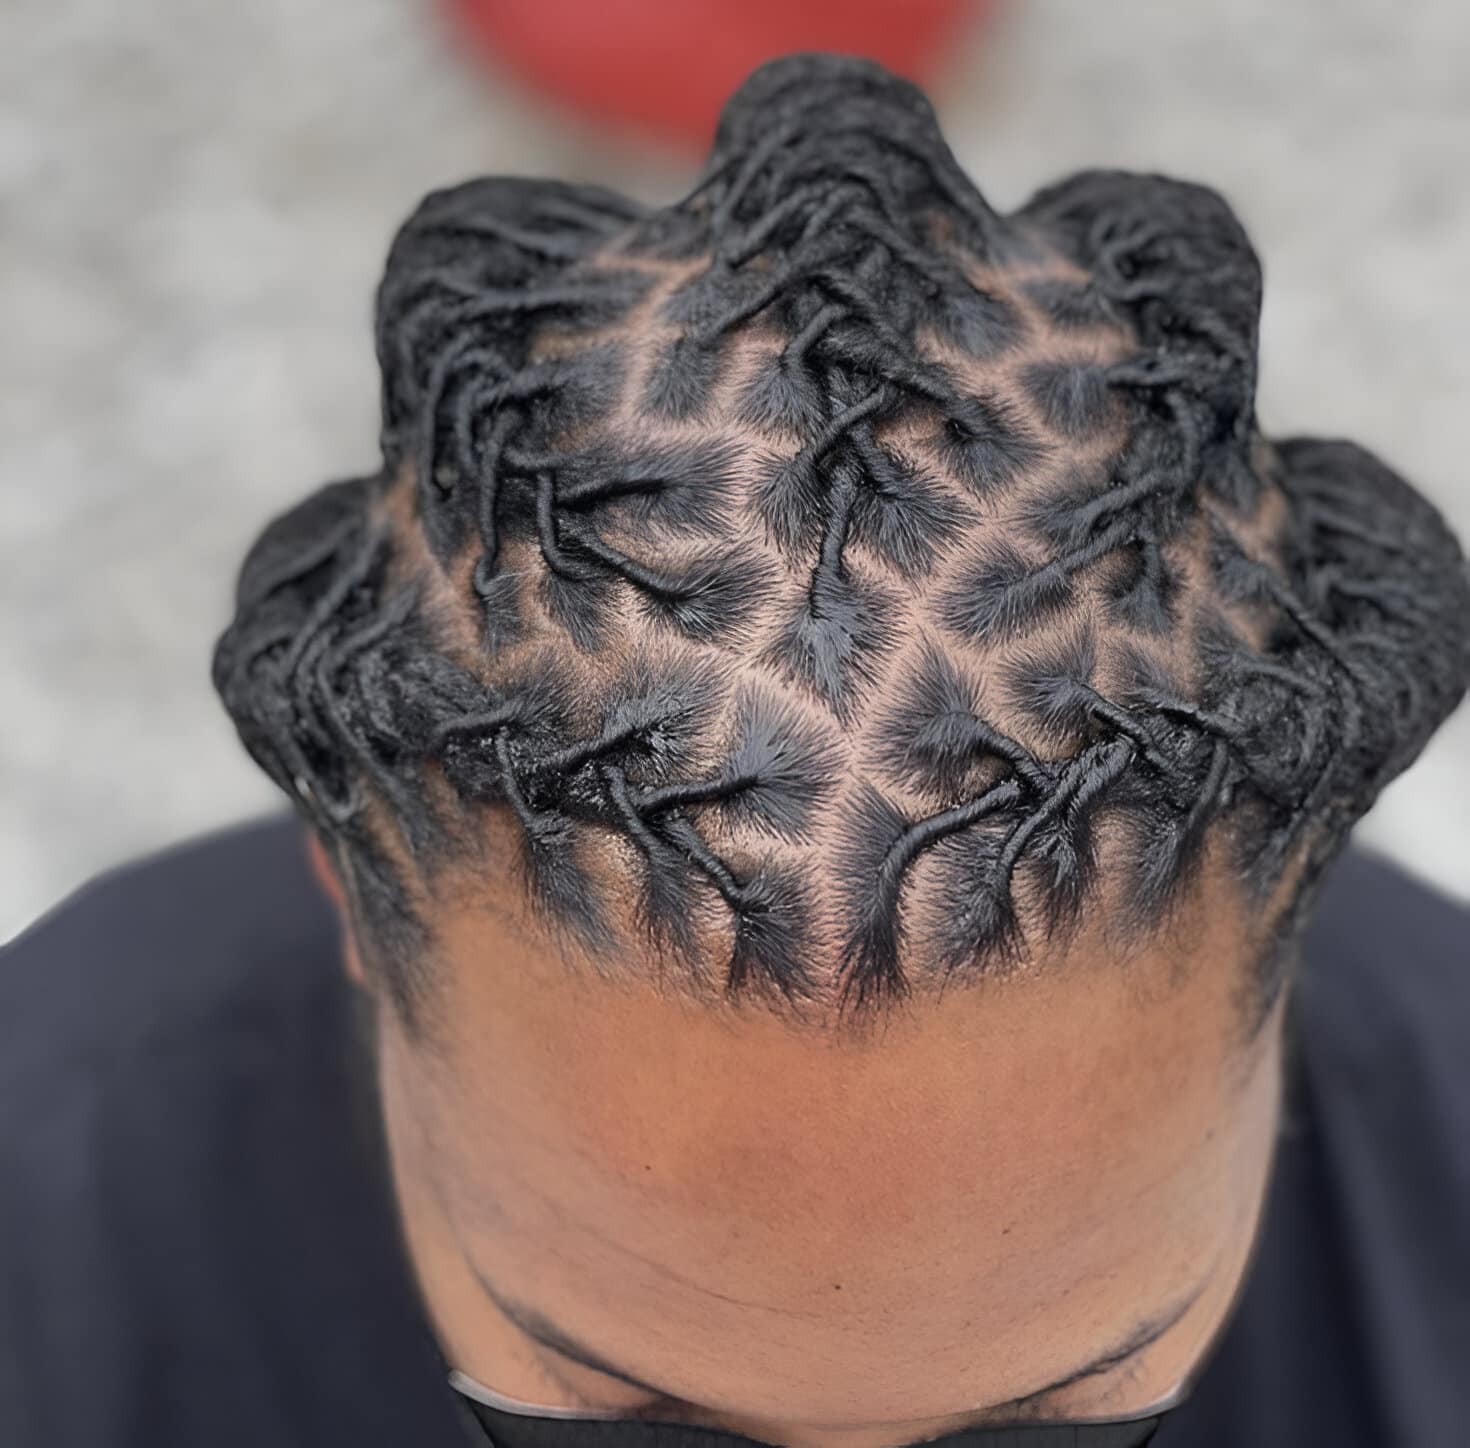 Image of 5 Barrel Twists inspired by Barrel Twist Hairstyles